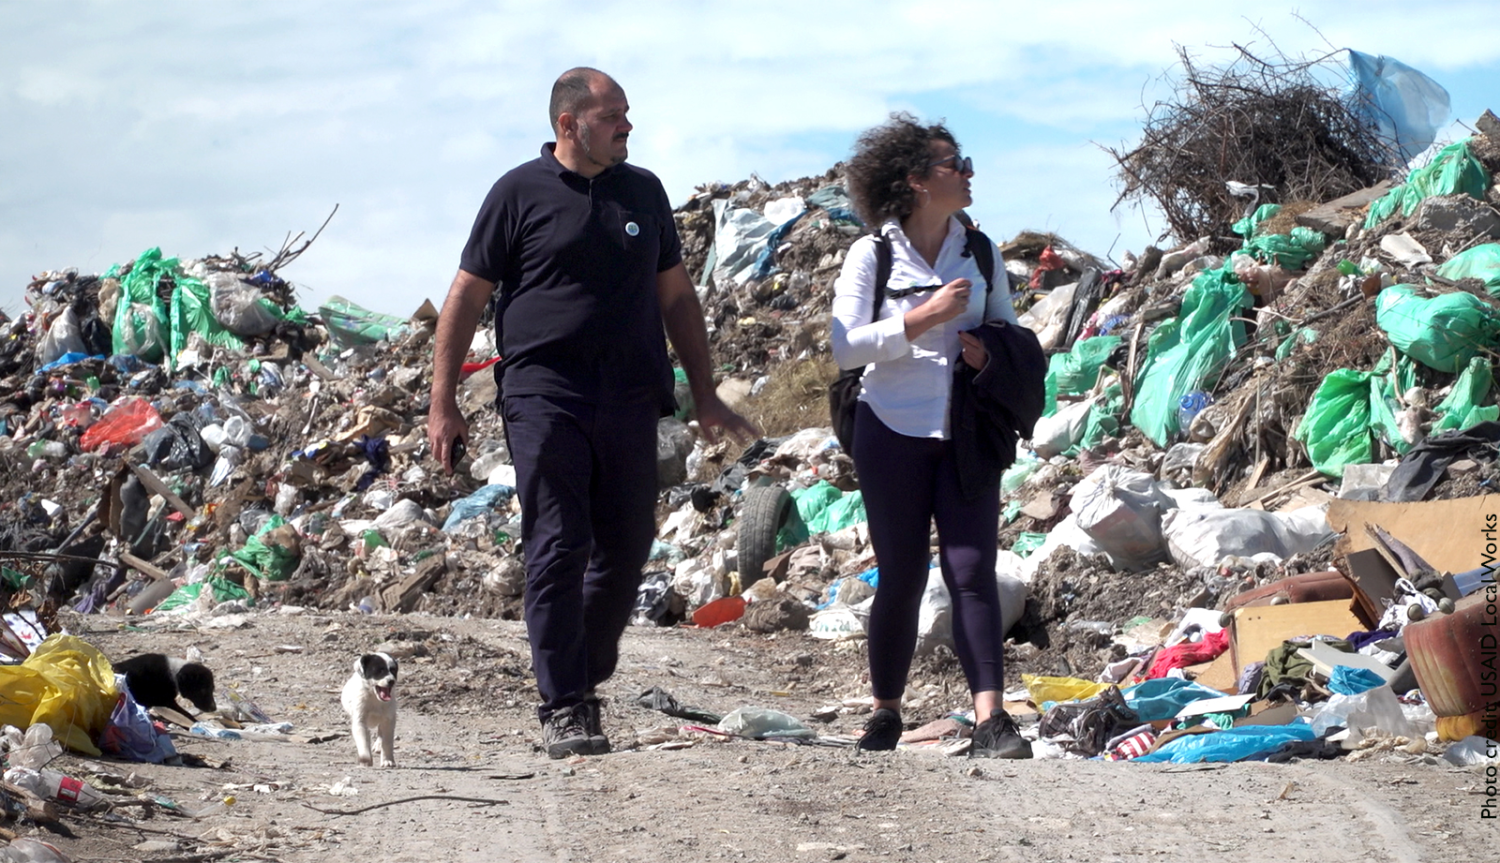 Members from The Sokobanja Ecological Society visit a new waste pick-up site as they work to end illegal dumping.